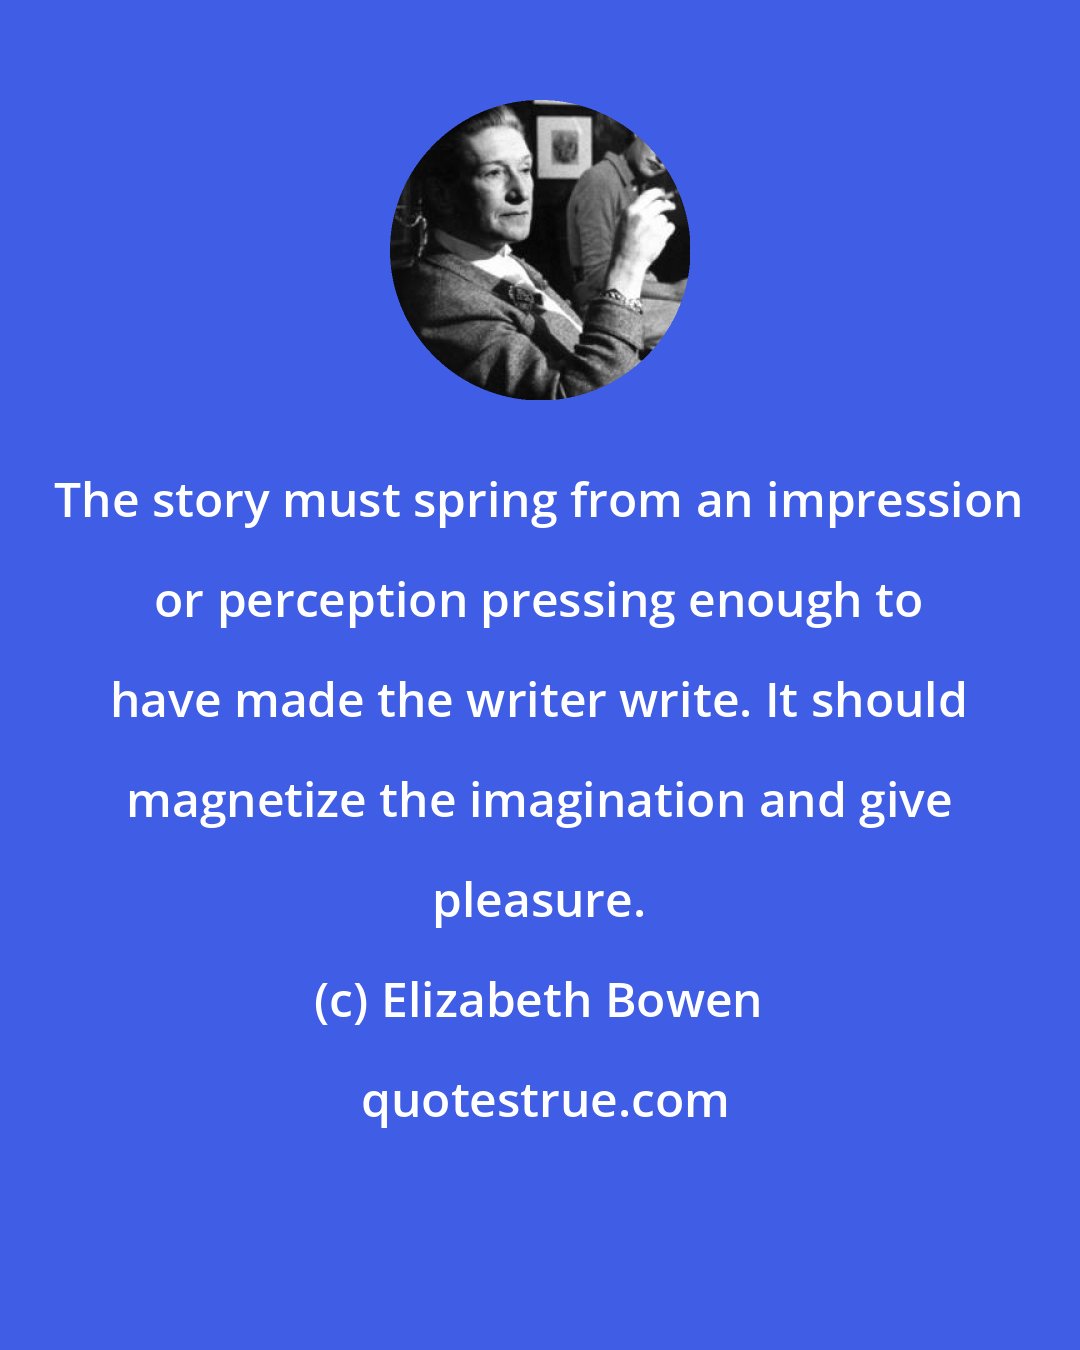 Elizabeth Bowen: The story must spring from an impression or perception pressing enough to have made the writer write. It should magnetize the imagination and give pleasure.